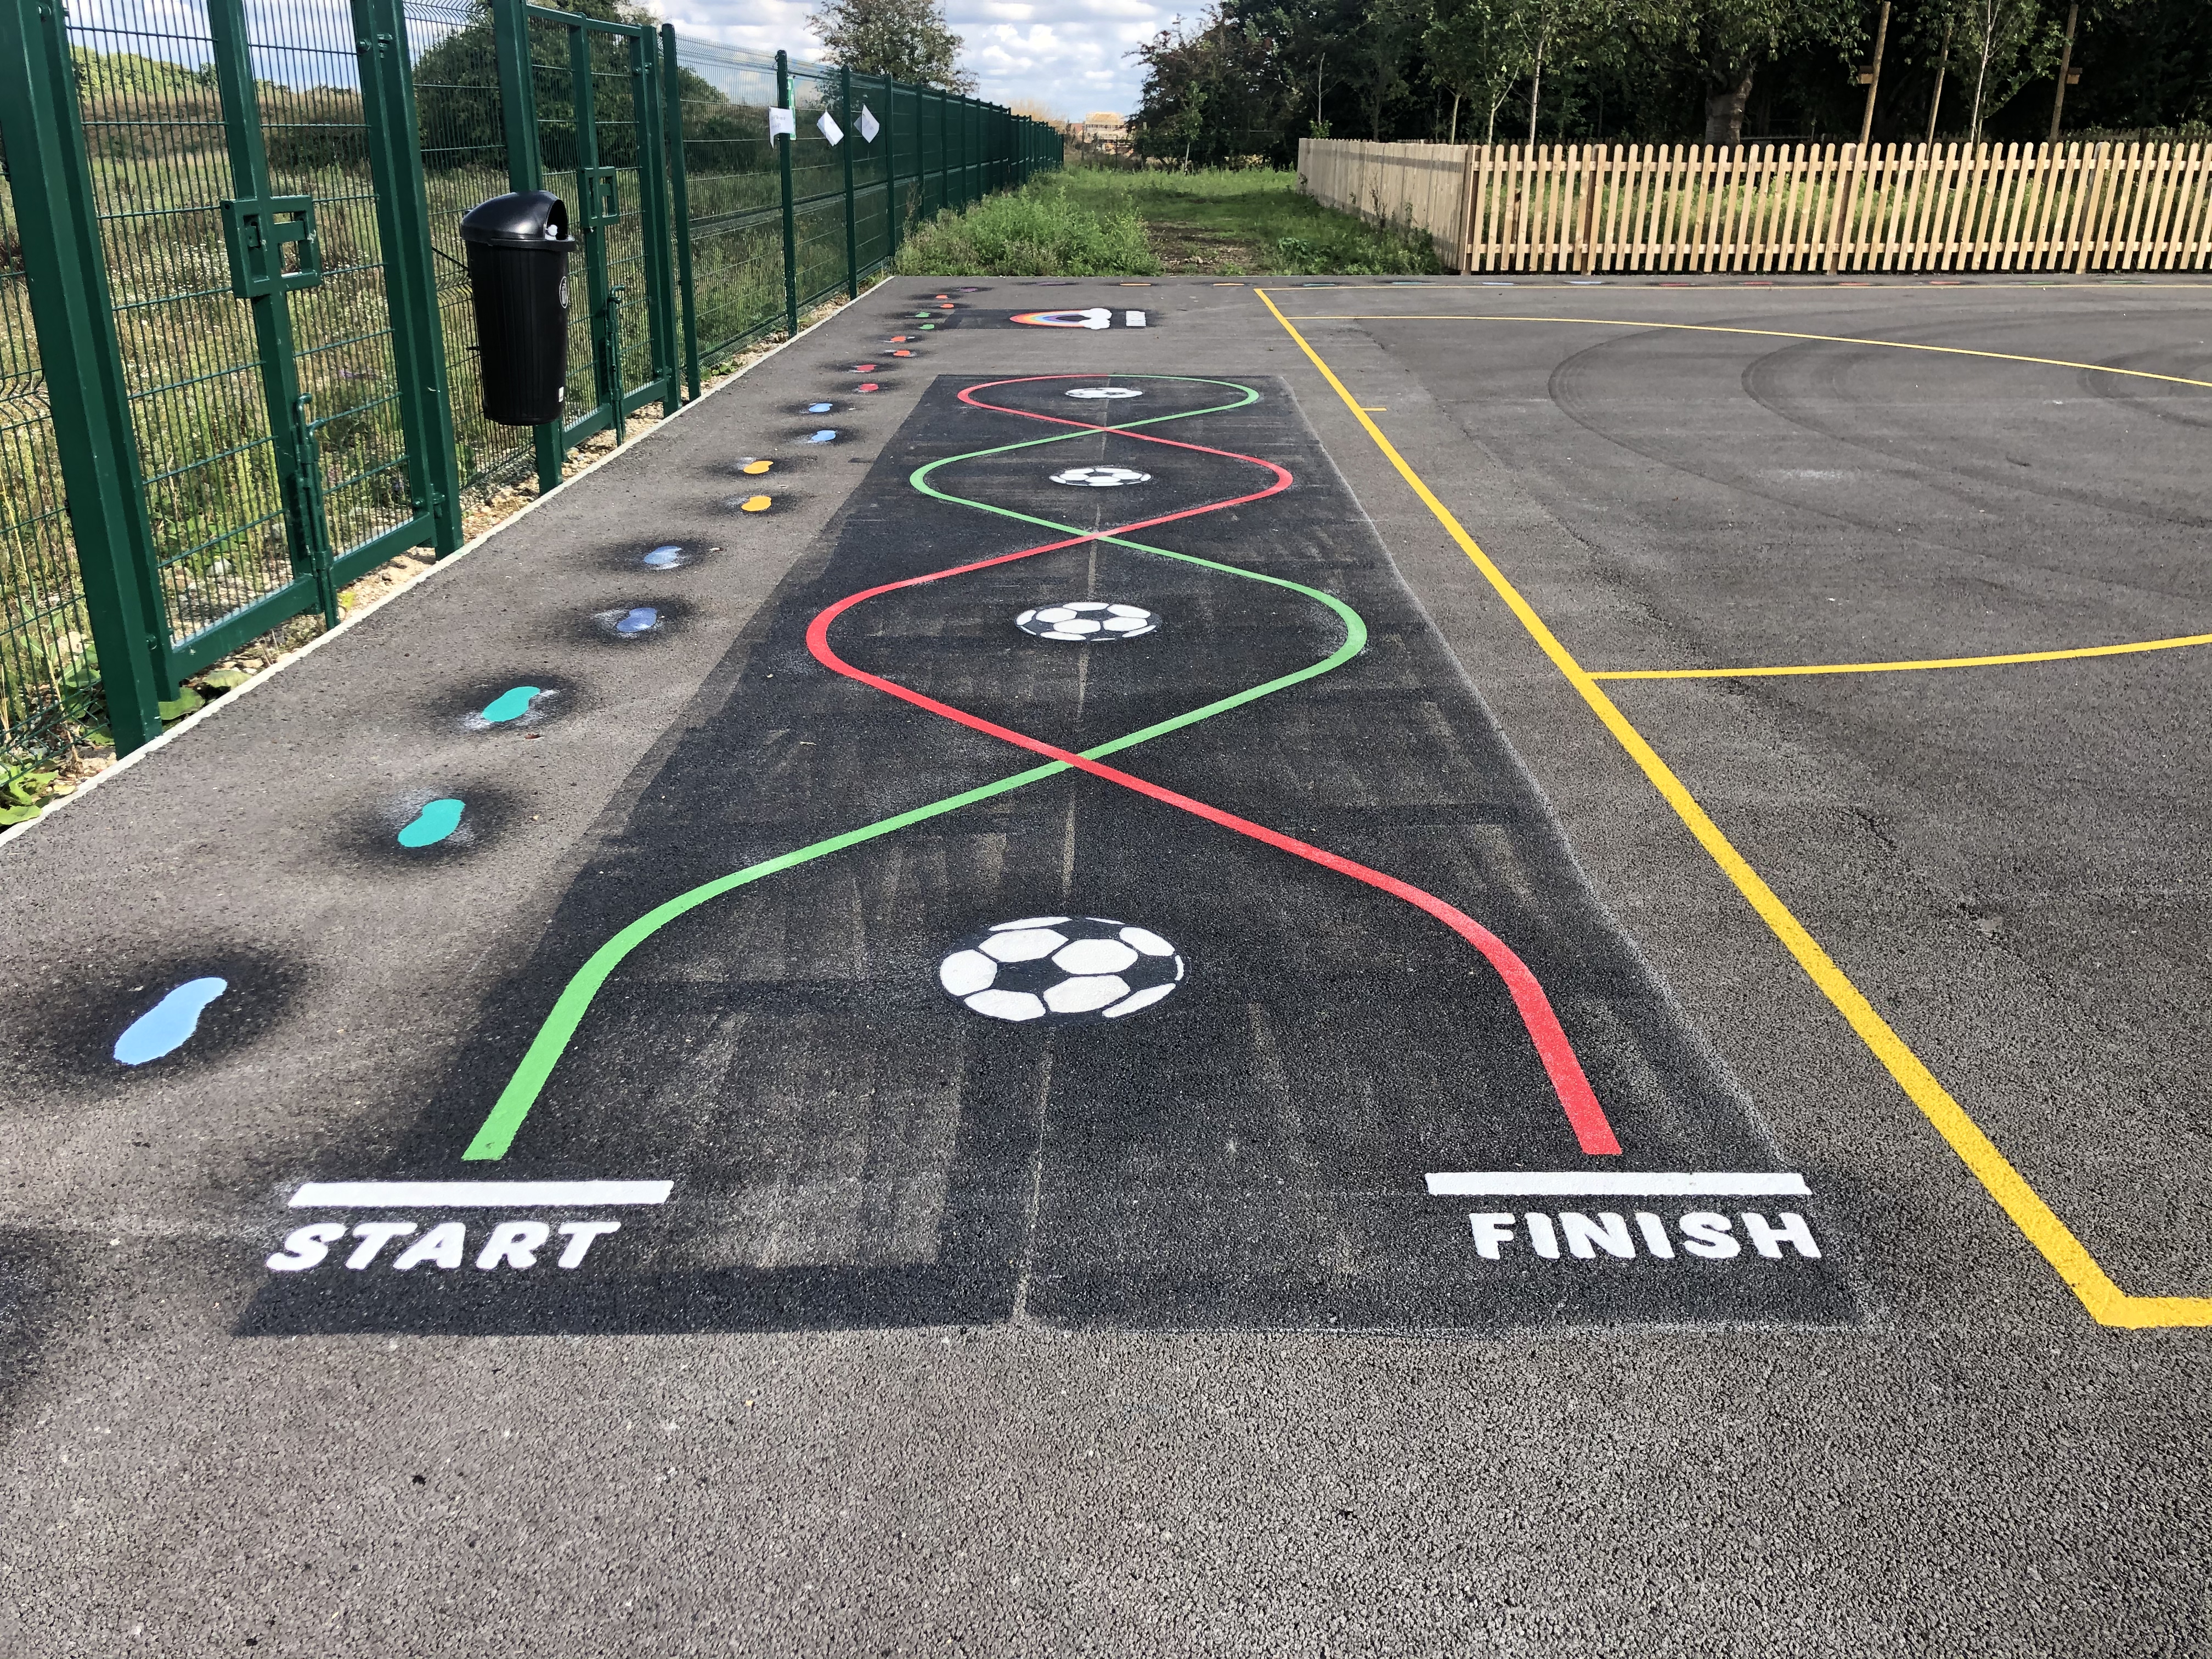 Embracing Diversity: Integrating a Range of Playground Markings for Equal Opportunities in Play